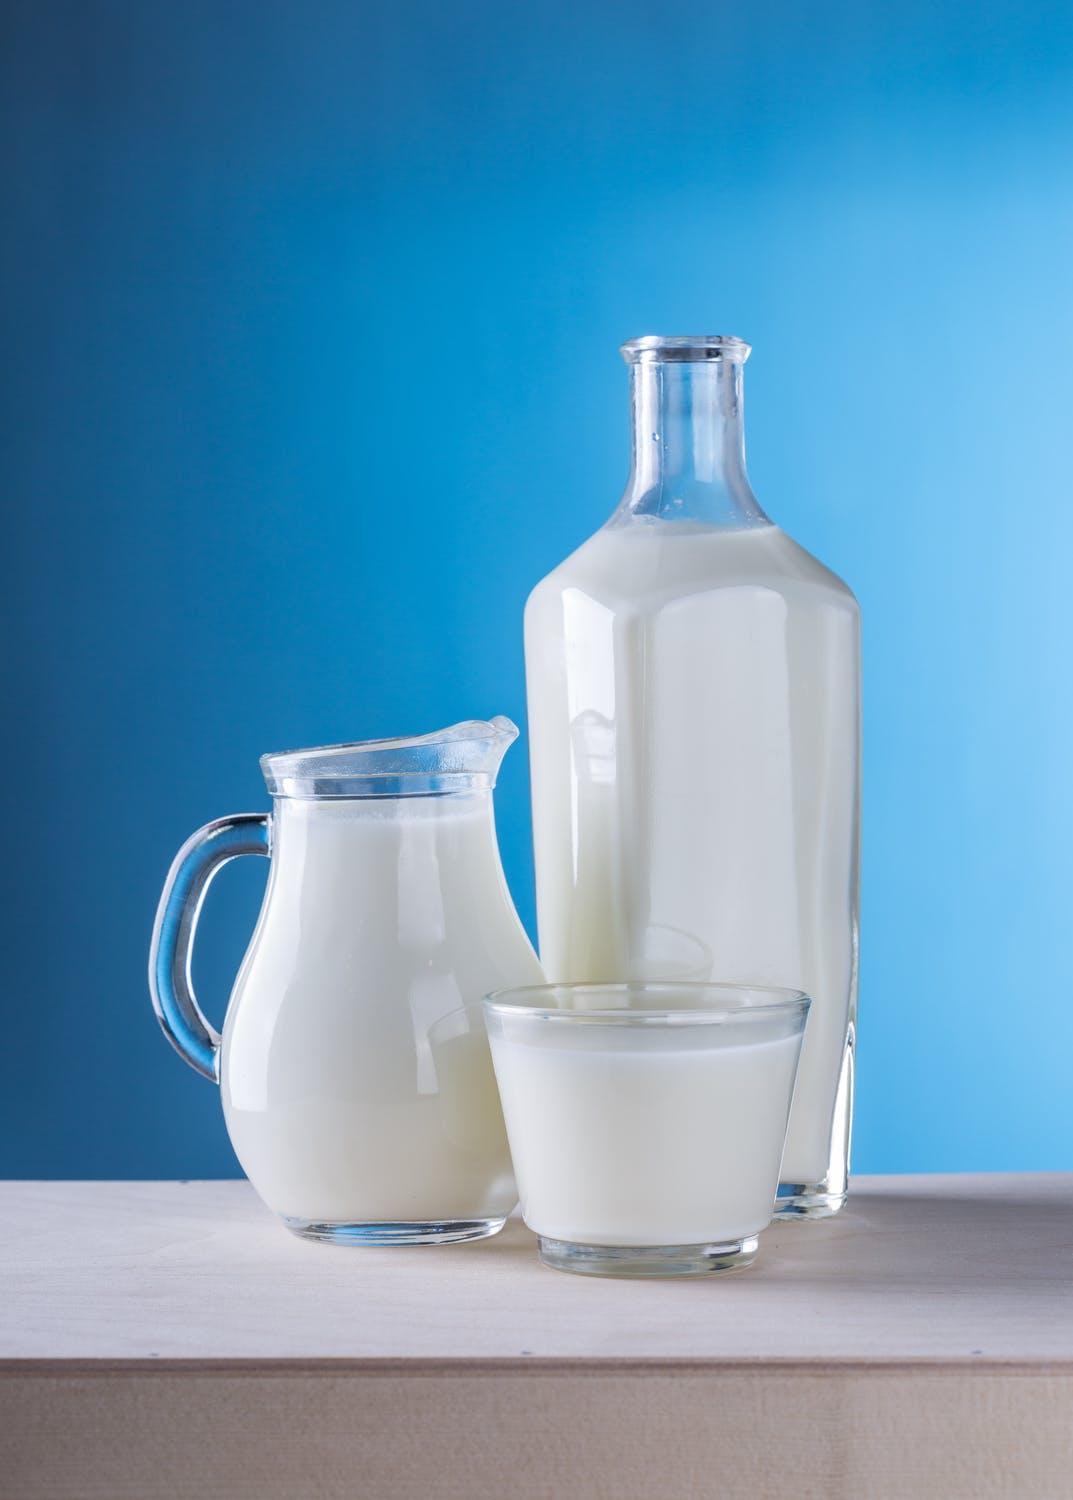 Dairy or No Dairy? Toxins Found In Your Milk